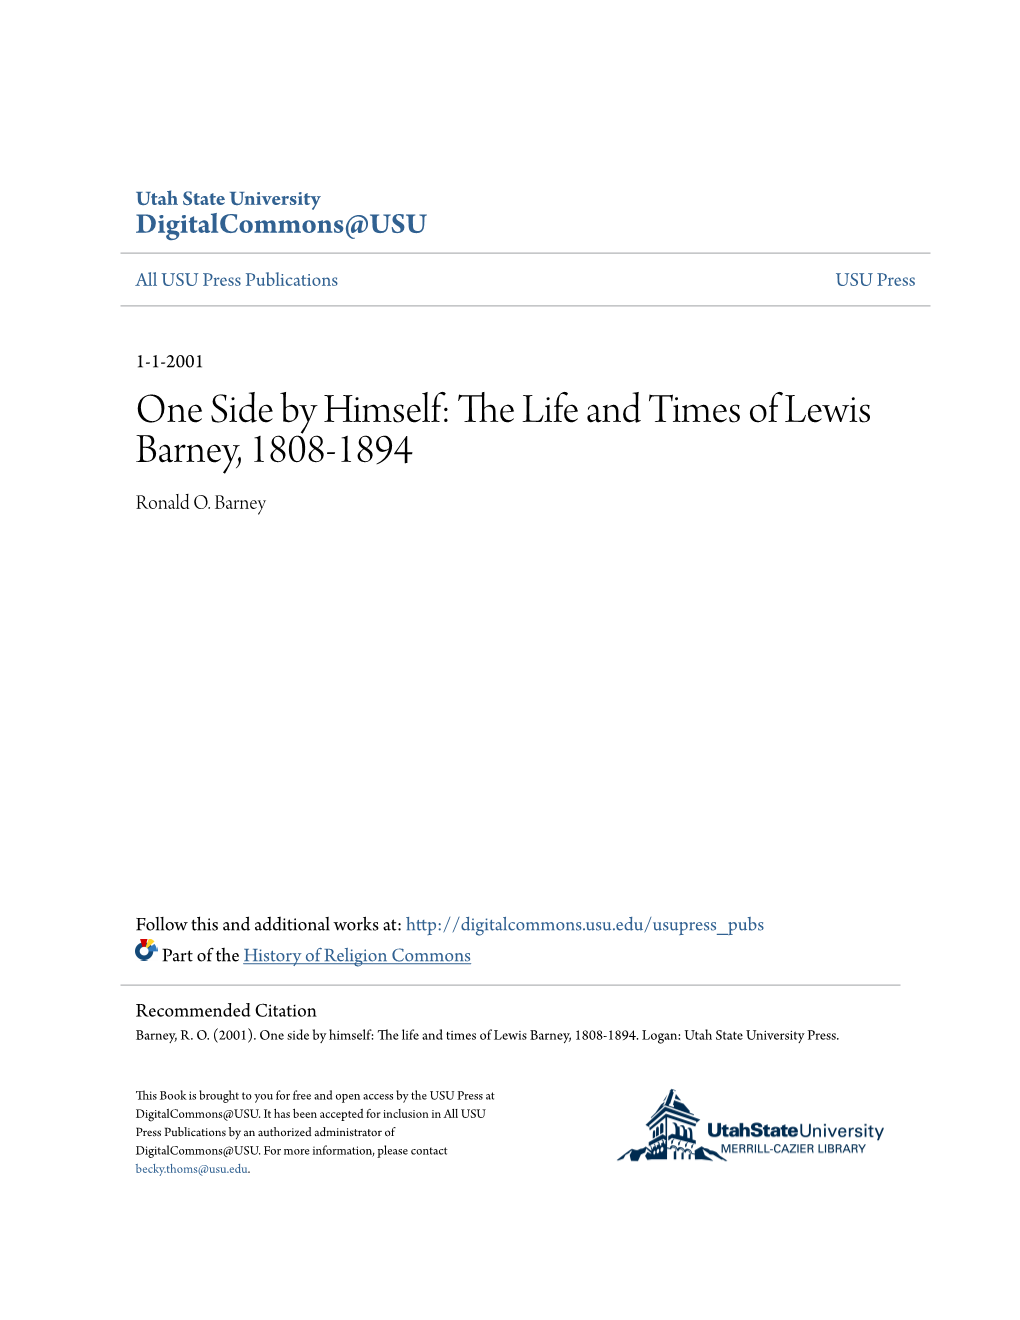 One Side by Himself: the Life and Times of Lewis Barney, 1808-1894 Ronald O